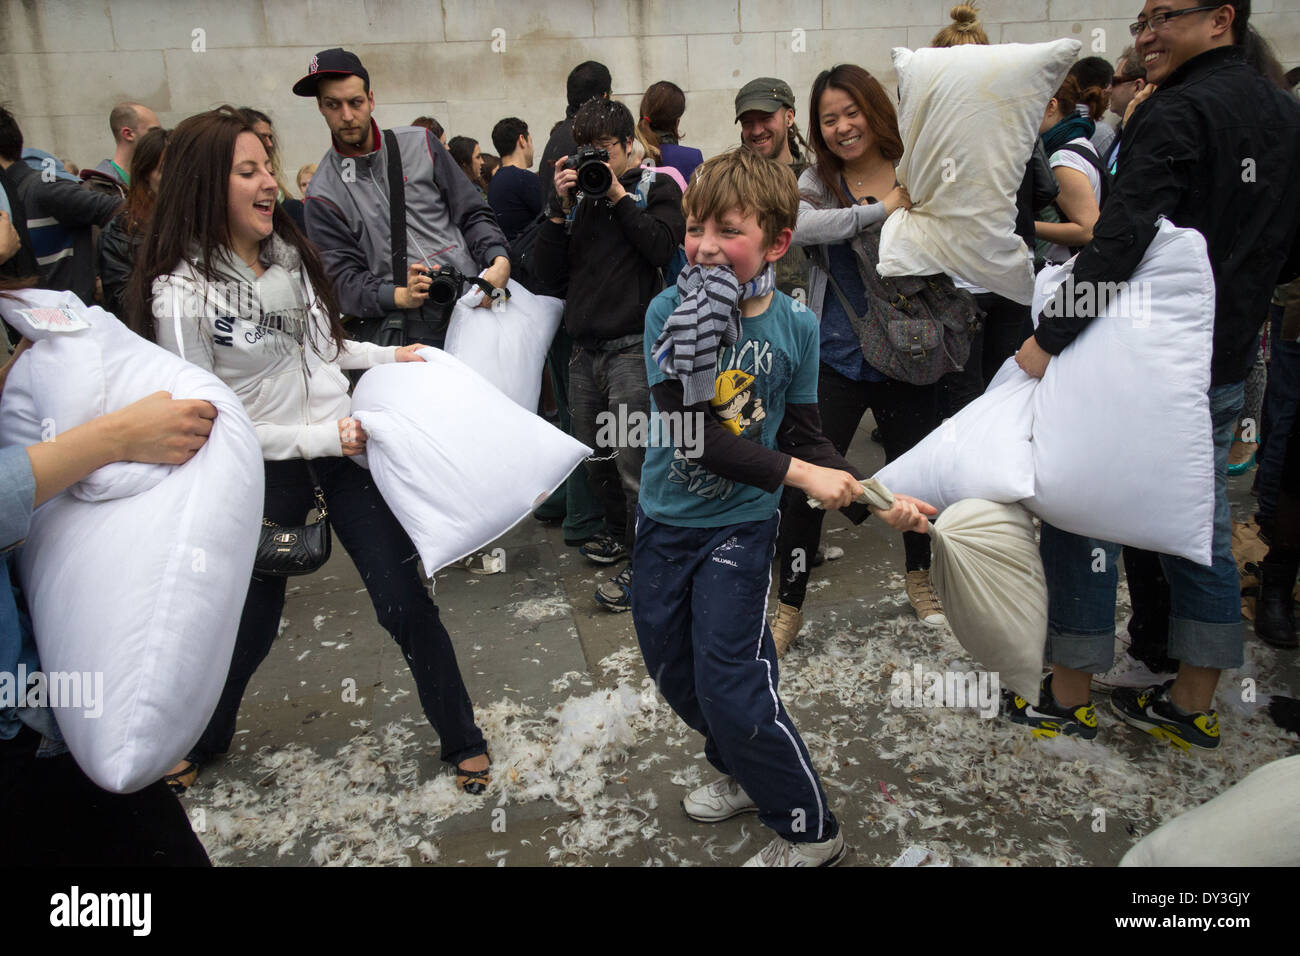 A young child hits a series of people during the pillow fight. Stock Photo